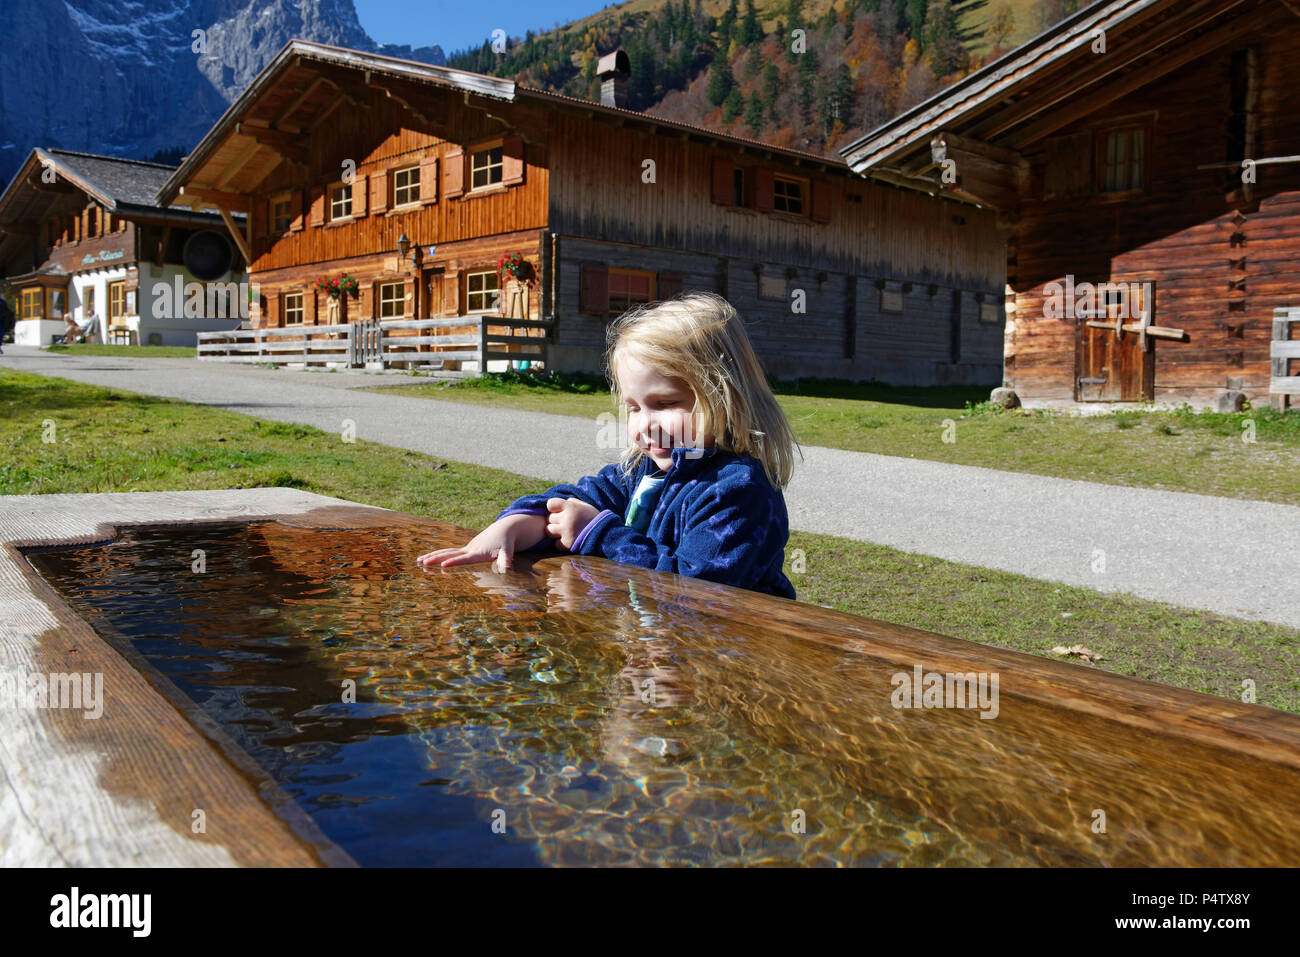 Austria, Tyrol, Eng, small girl bathing hand in drinking trough Stock Photo